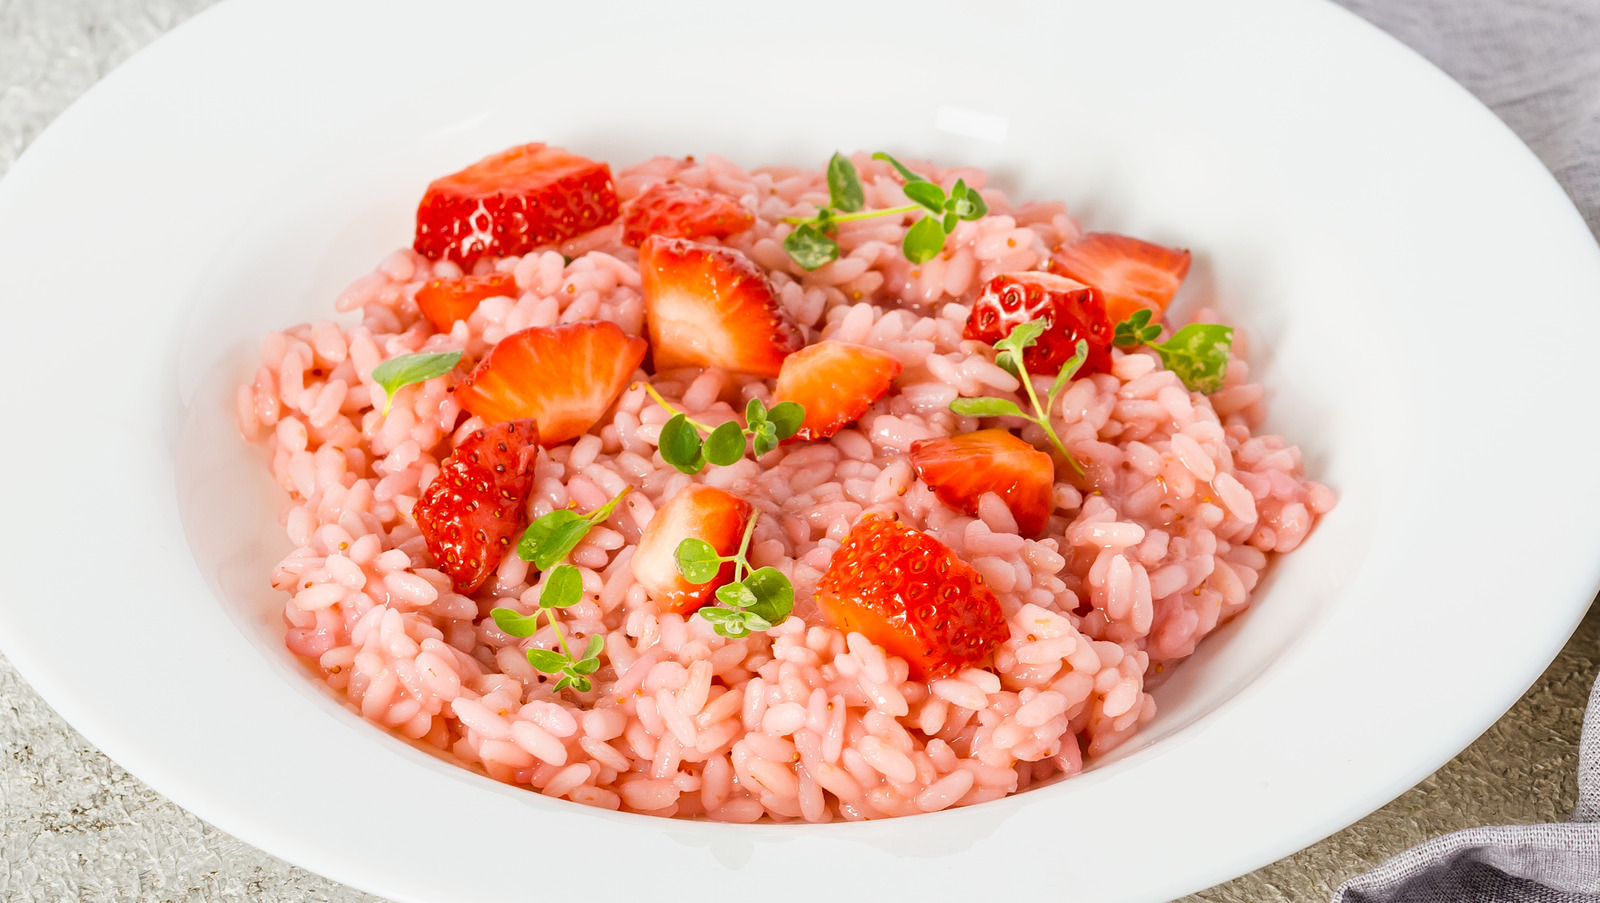 The 1980s Strawberry Risotto You May Have Forgotten About